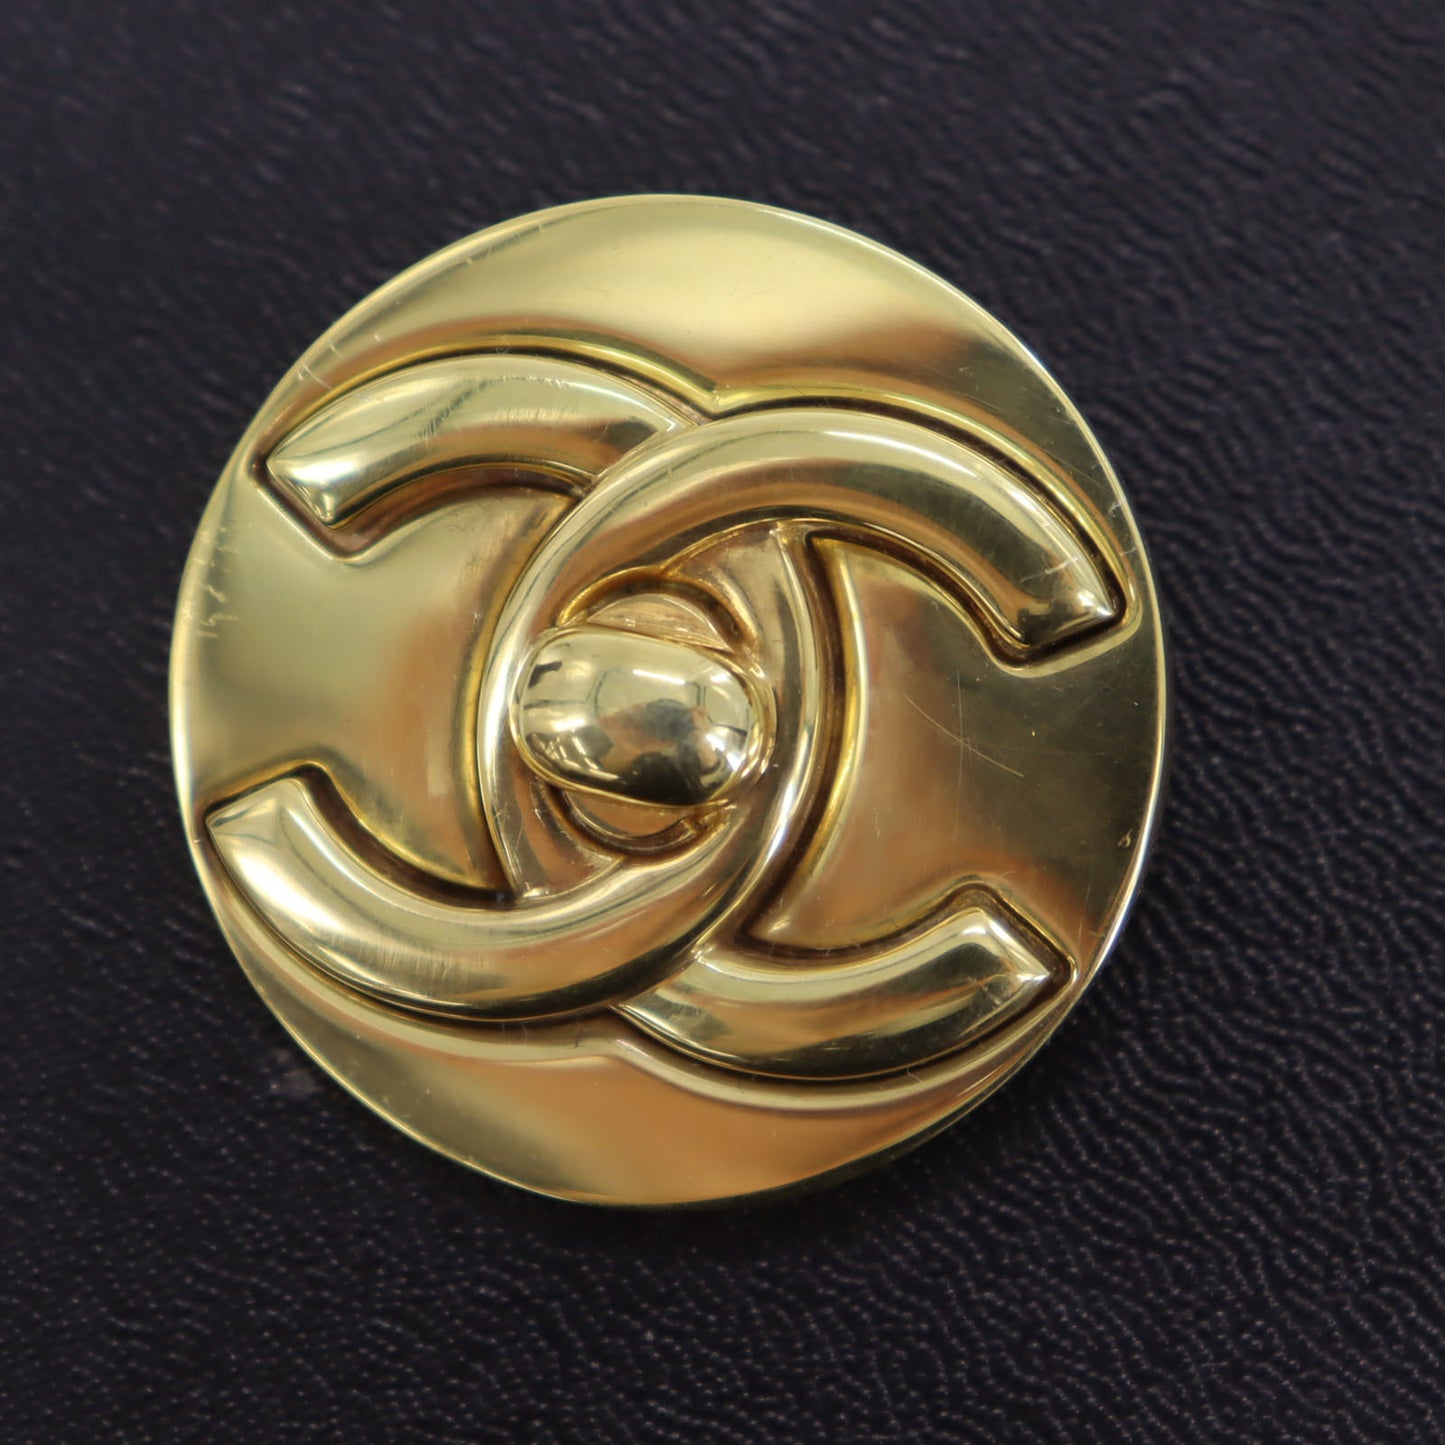 CHANEL CC Logos Round Pin Brooch Gold Plated 97 A #BX894